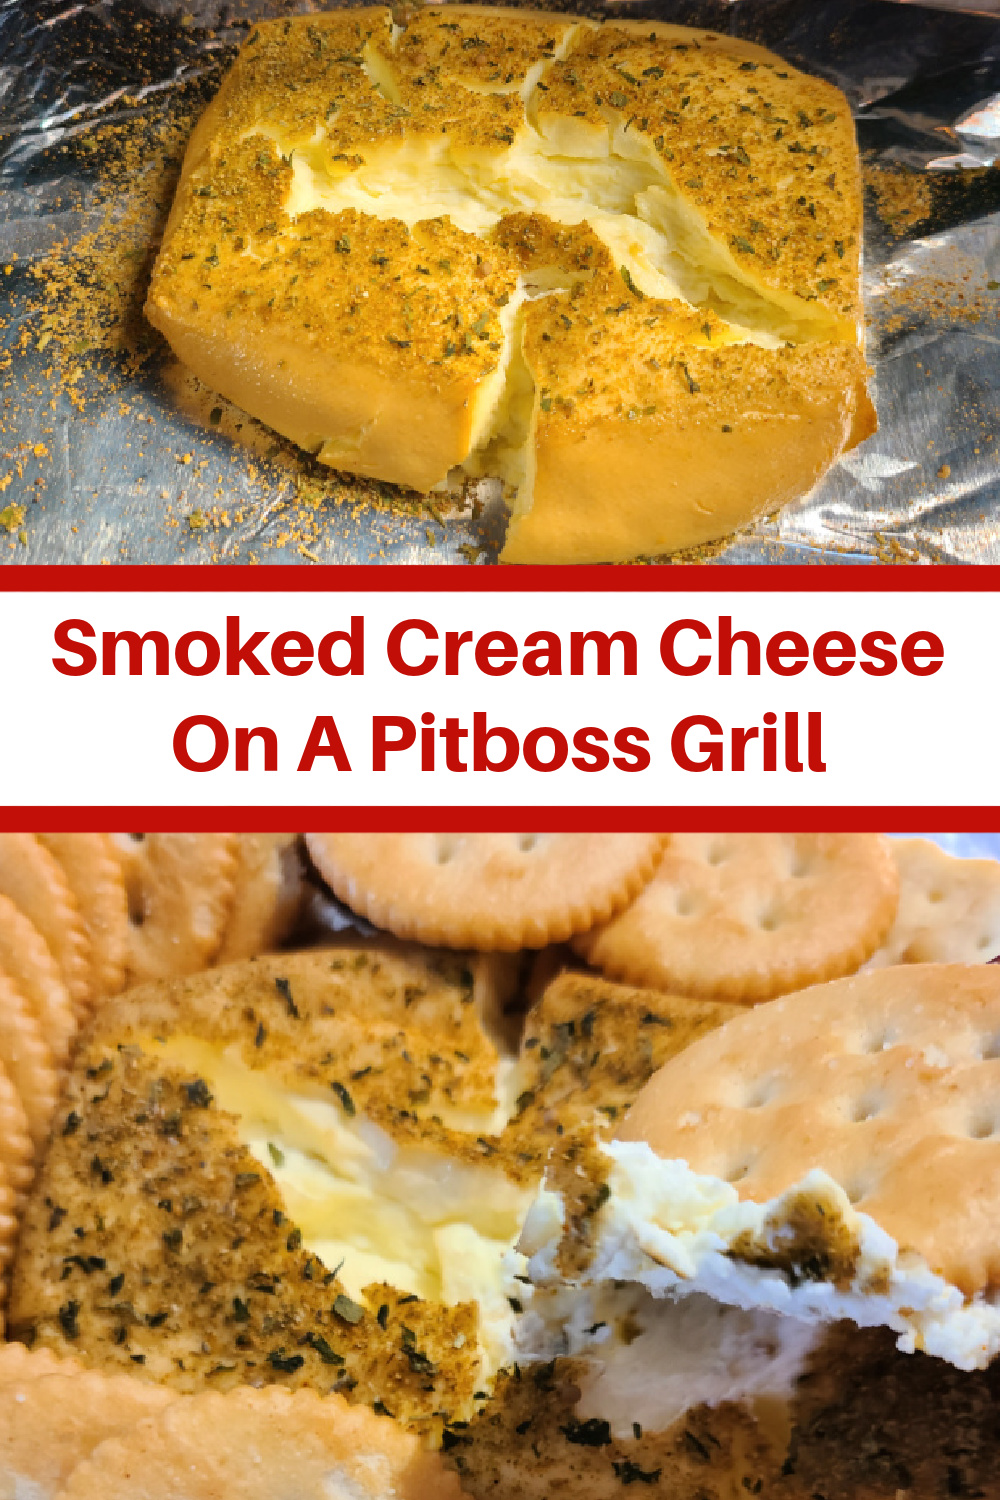 How To Make Smoked Cream Cheese on the Pit Boss! This is such an easy way to make a dip or add flavor to another recipe as well! You can use a variety of spices to change the flavor. This can be eaten as is, on bagels, with crackers, or mixed into chowders or other dips.